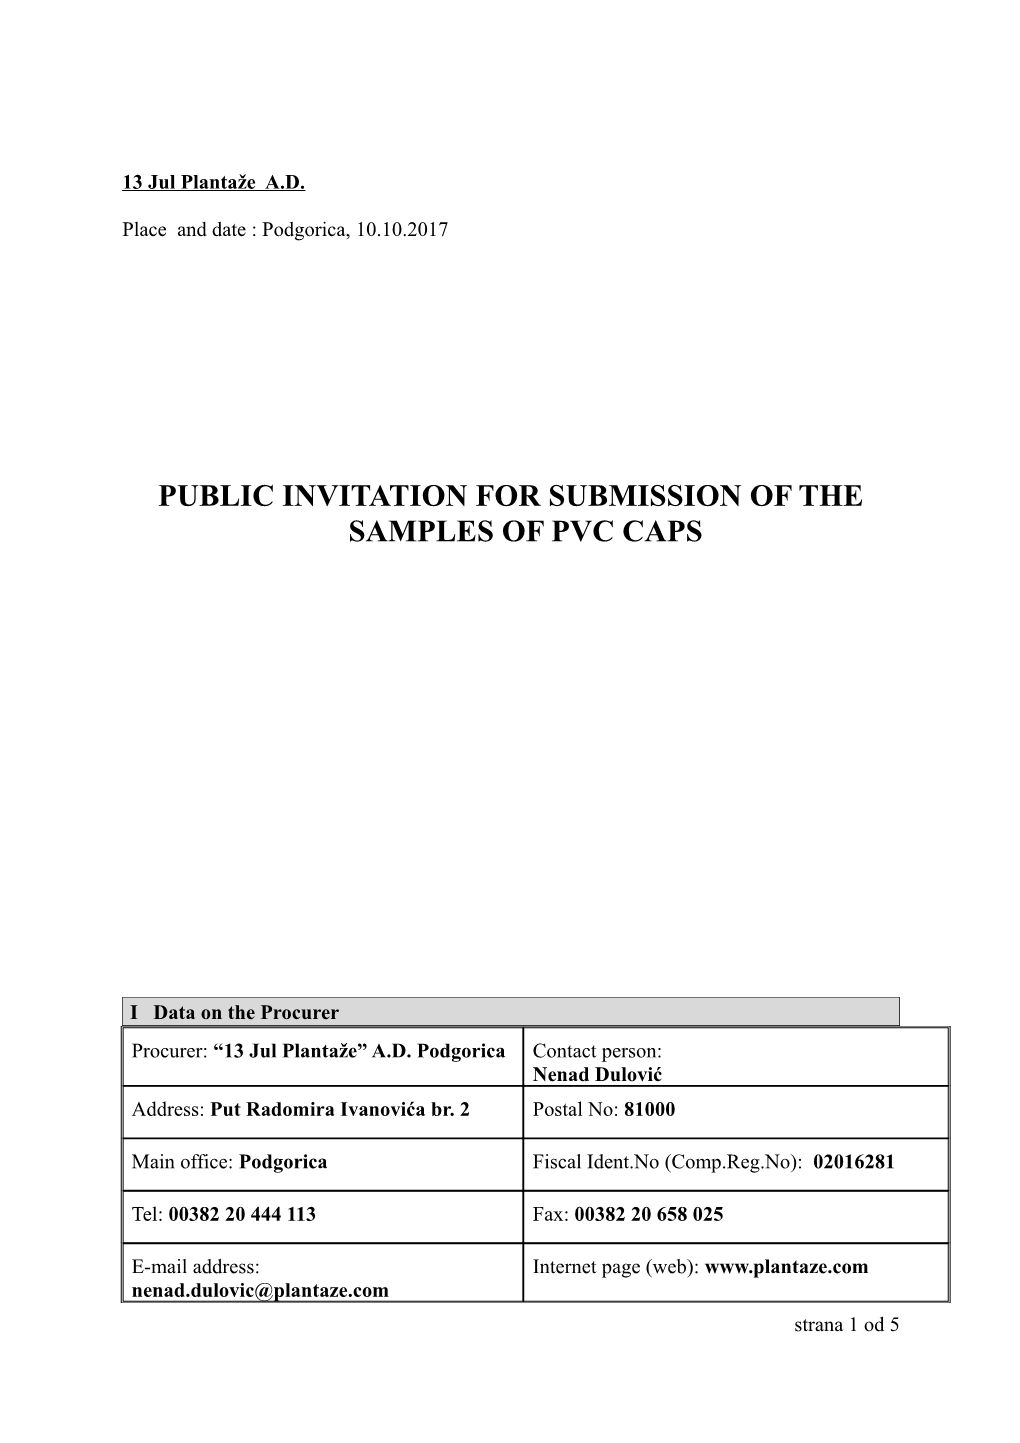 Public Invitation for Submission of the Samples of Pvc Caps